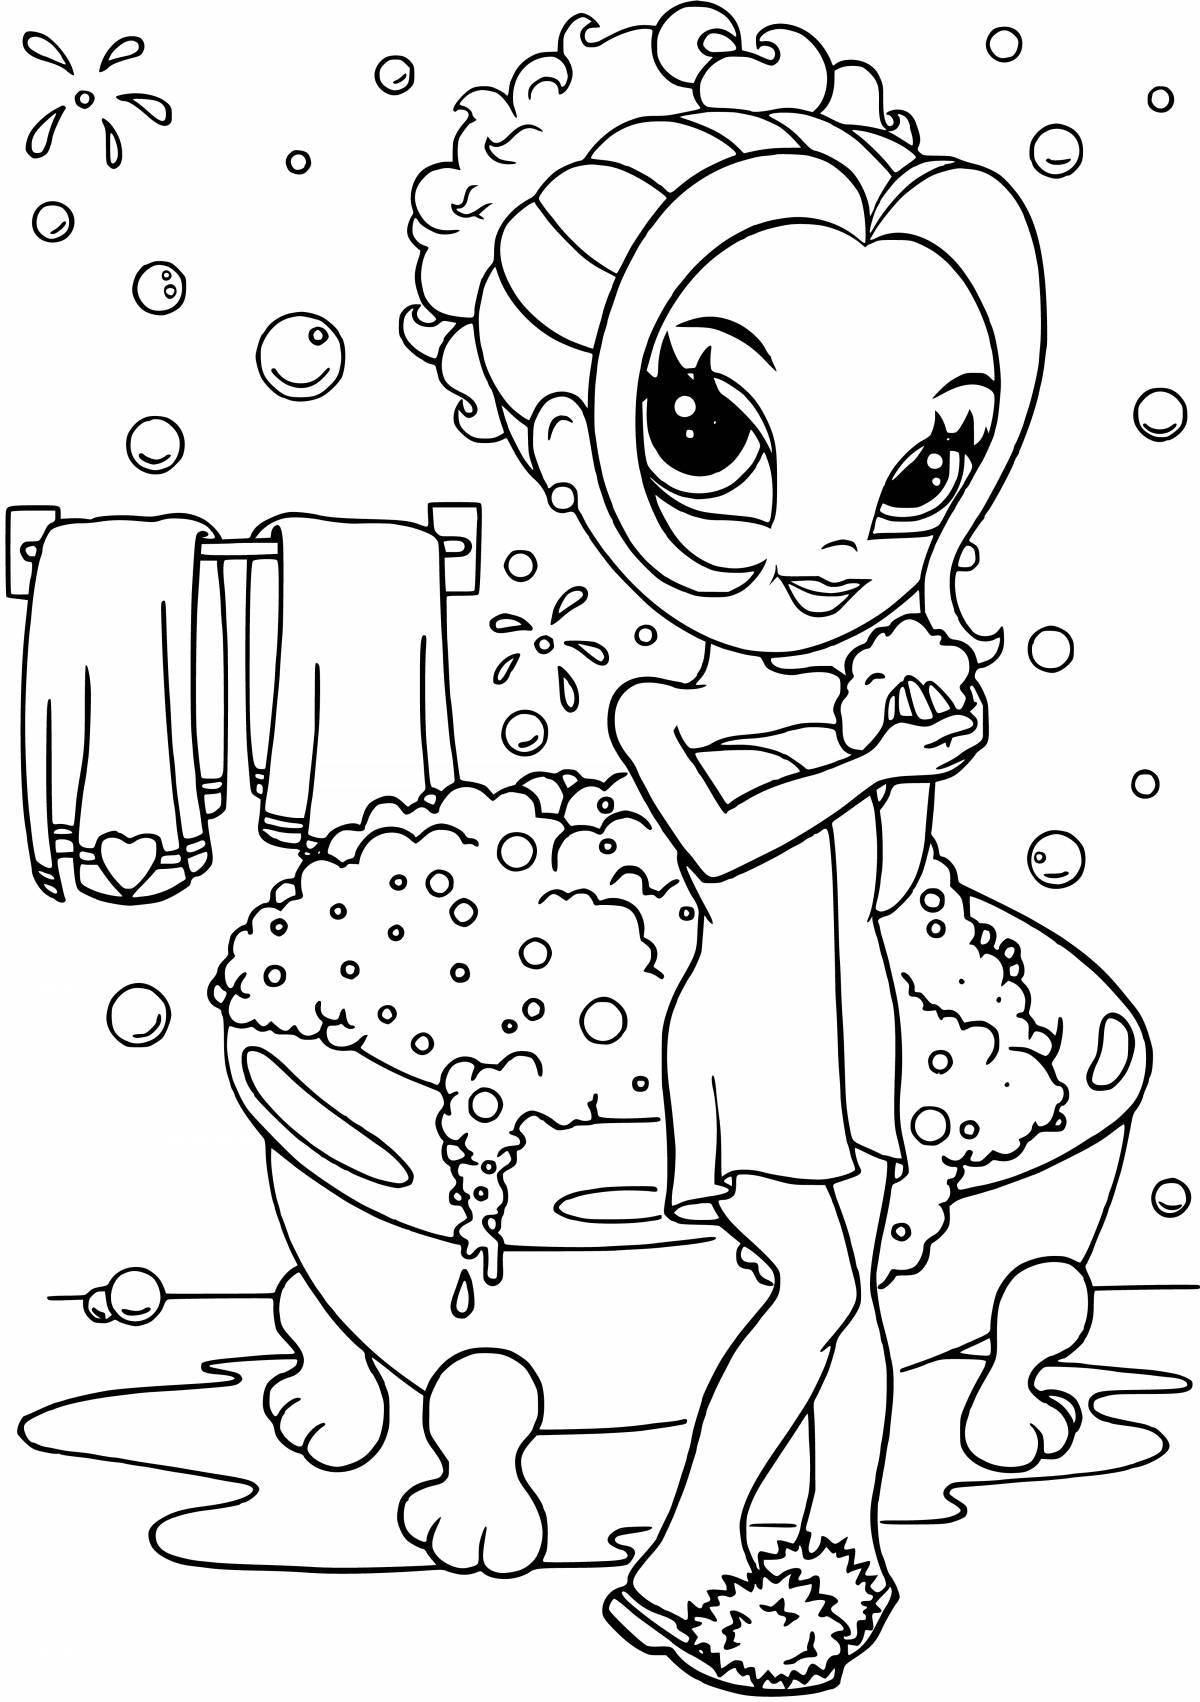 Crazy coloring book for girls 7-8 years old